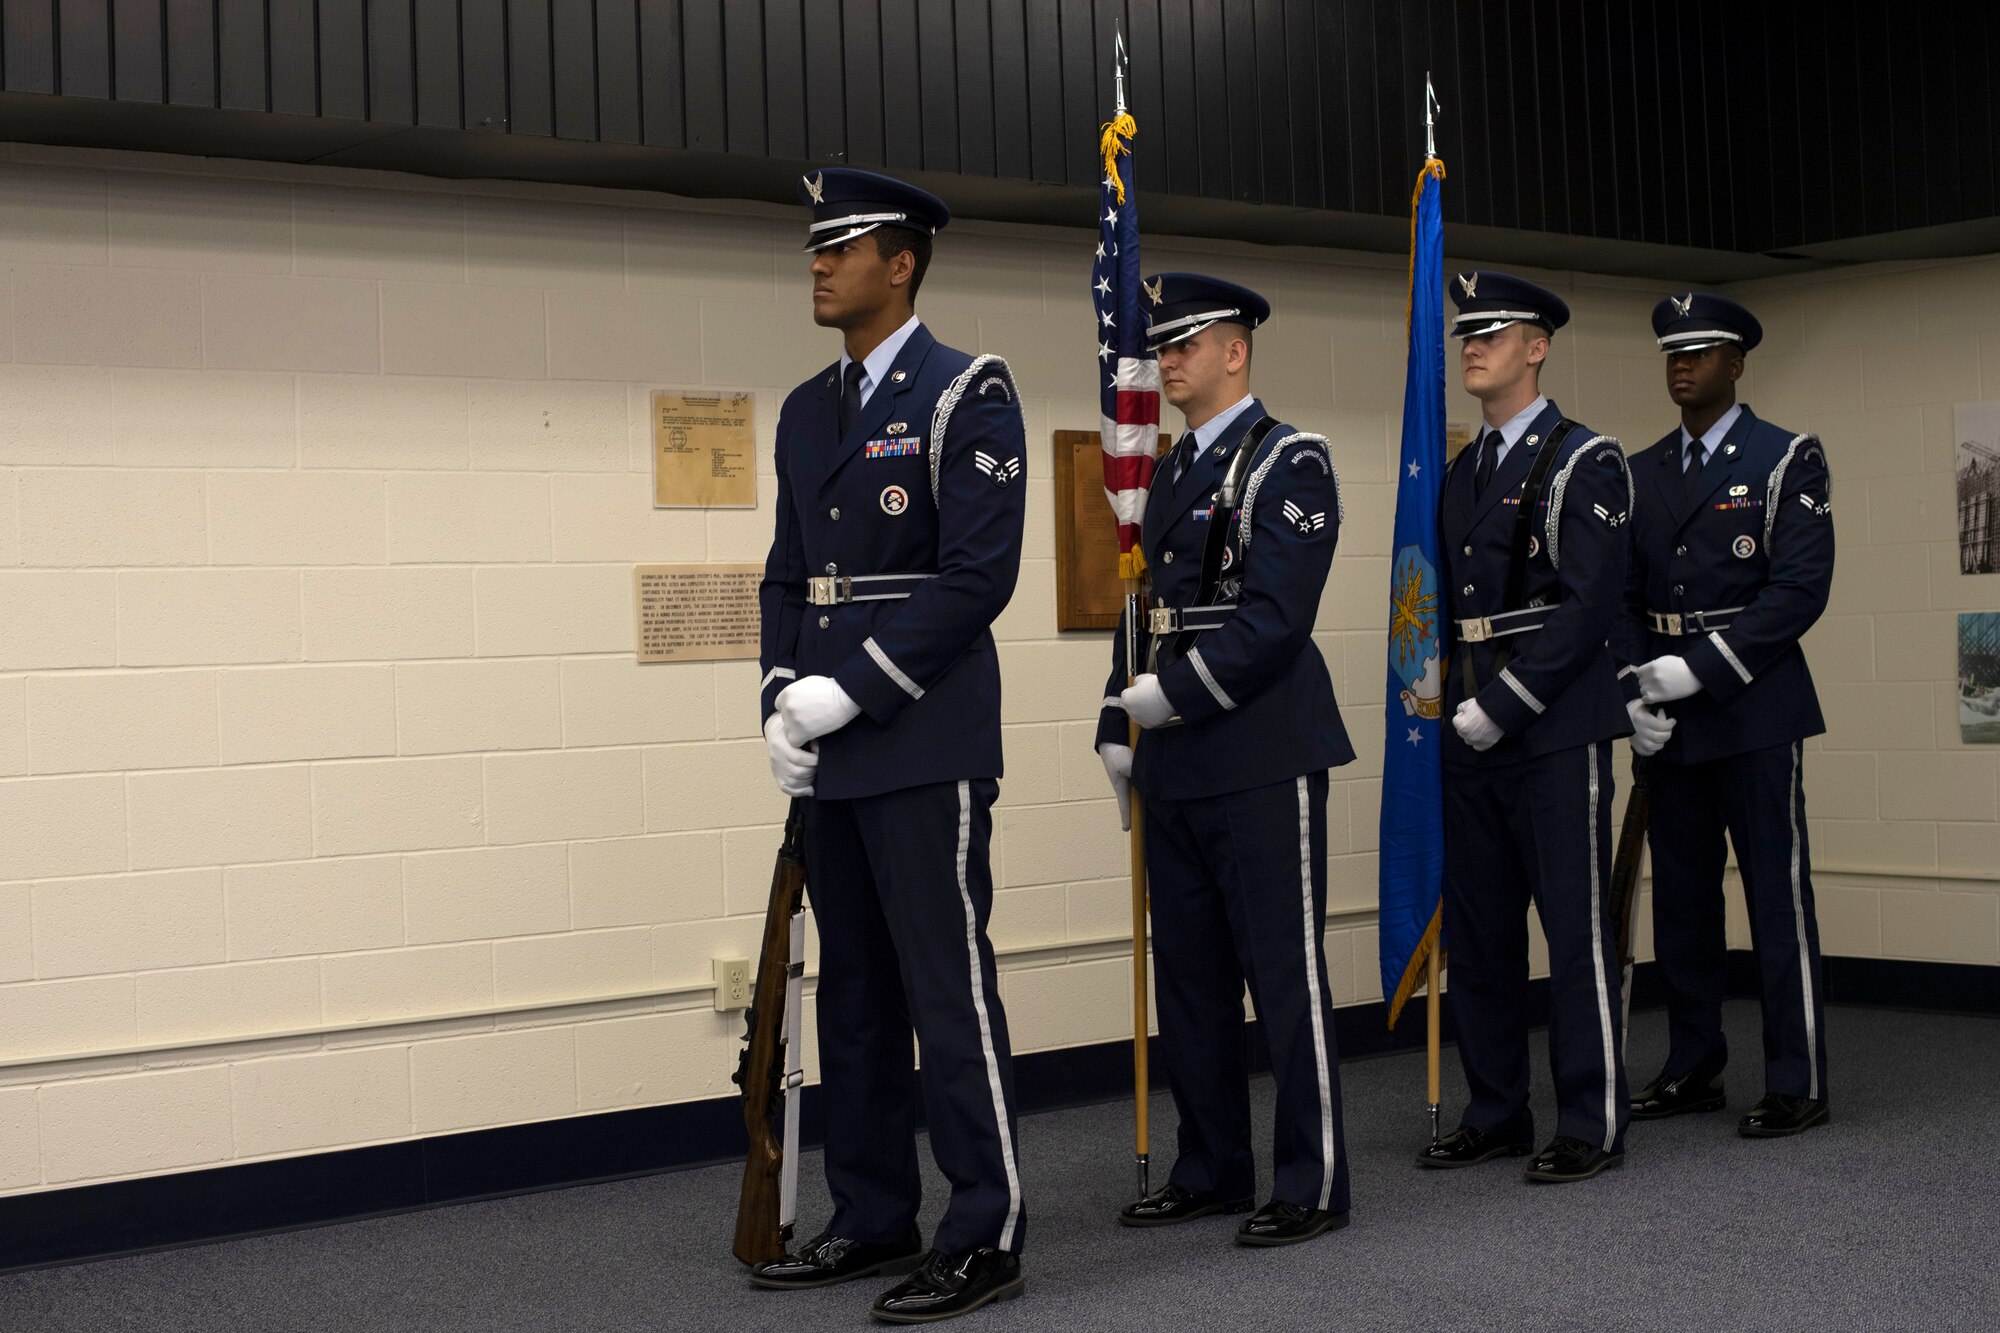 The 319th Air Base Wing Honor Guard stands in wait prior to a change of command ceremony June 11, 2019, on Cavalier Air Force Station, North Dakota. The change of command ceremony took place to say goodbye to outgoing commander, Lt. Col. Stephen Hobbs, and hello to incoming commander, Lt. Col. Ryan Durand, of the 10th Space Warning Squadron. (U.S Air Force photo by Senior Airman Elora J. Martinez)